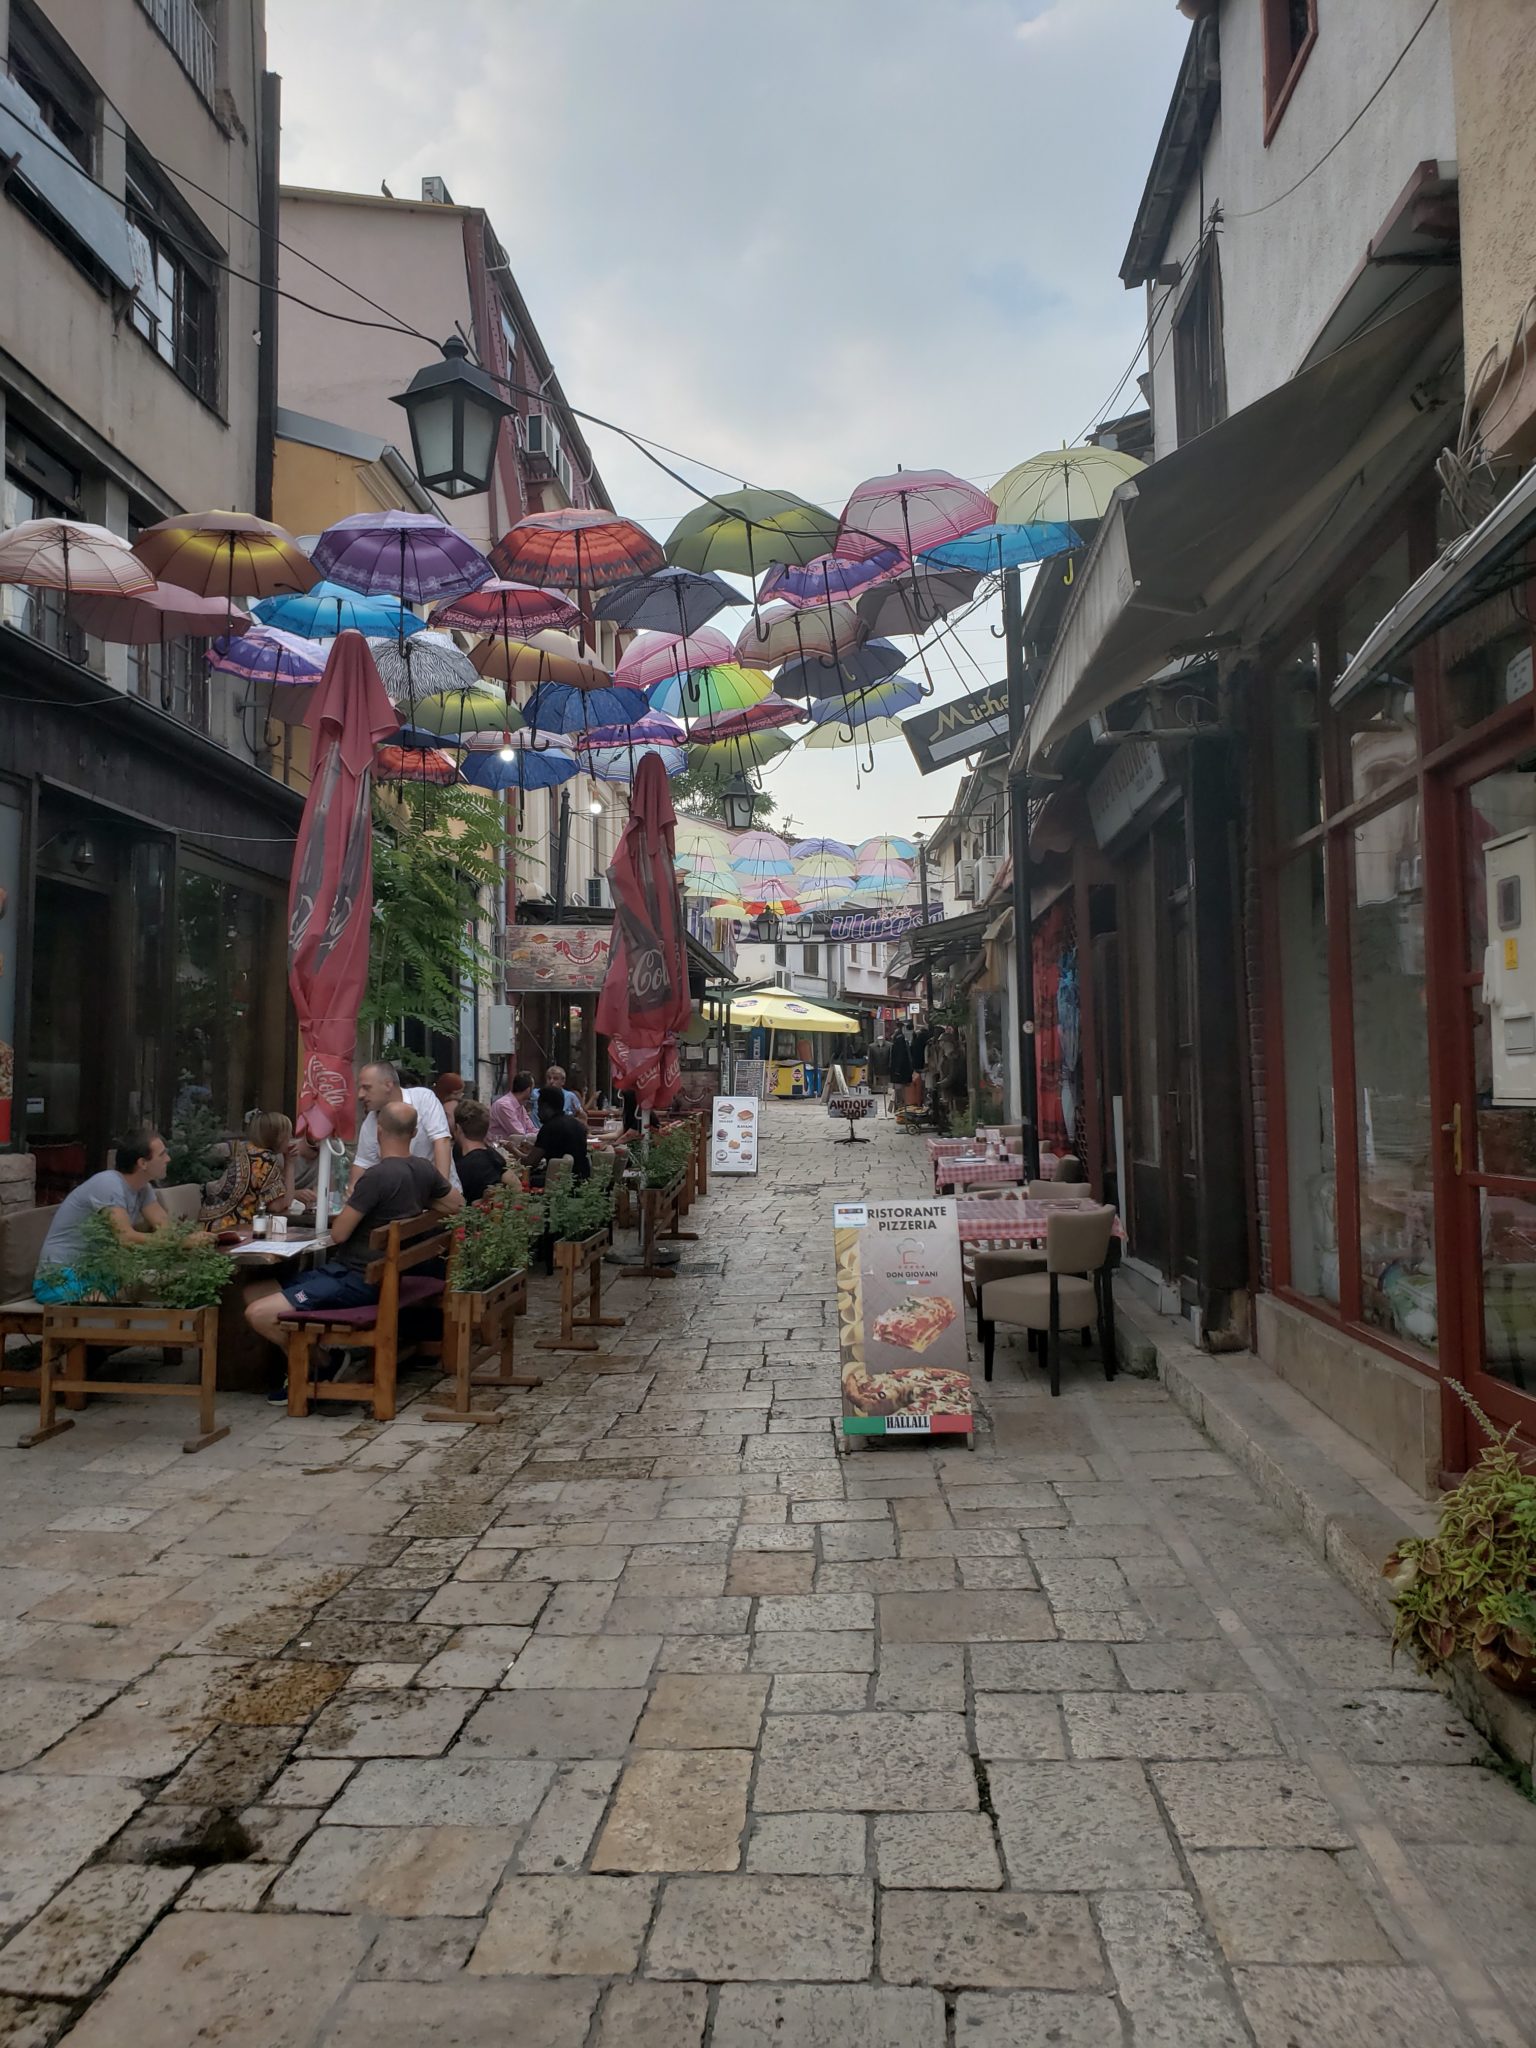 a street with tables and umbrellas over it